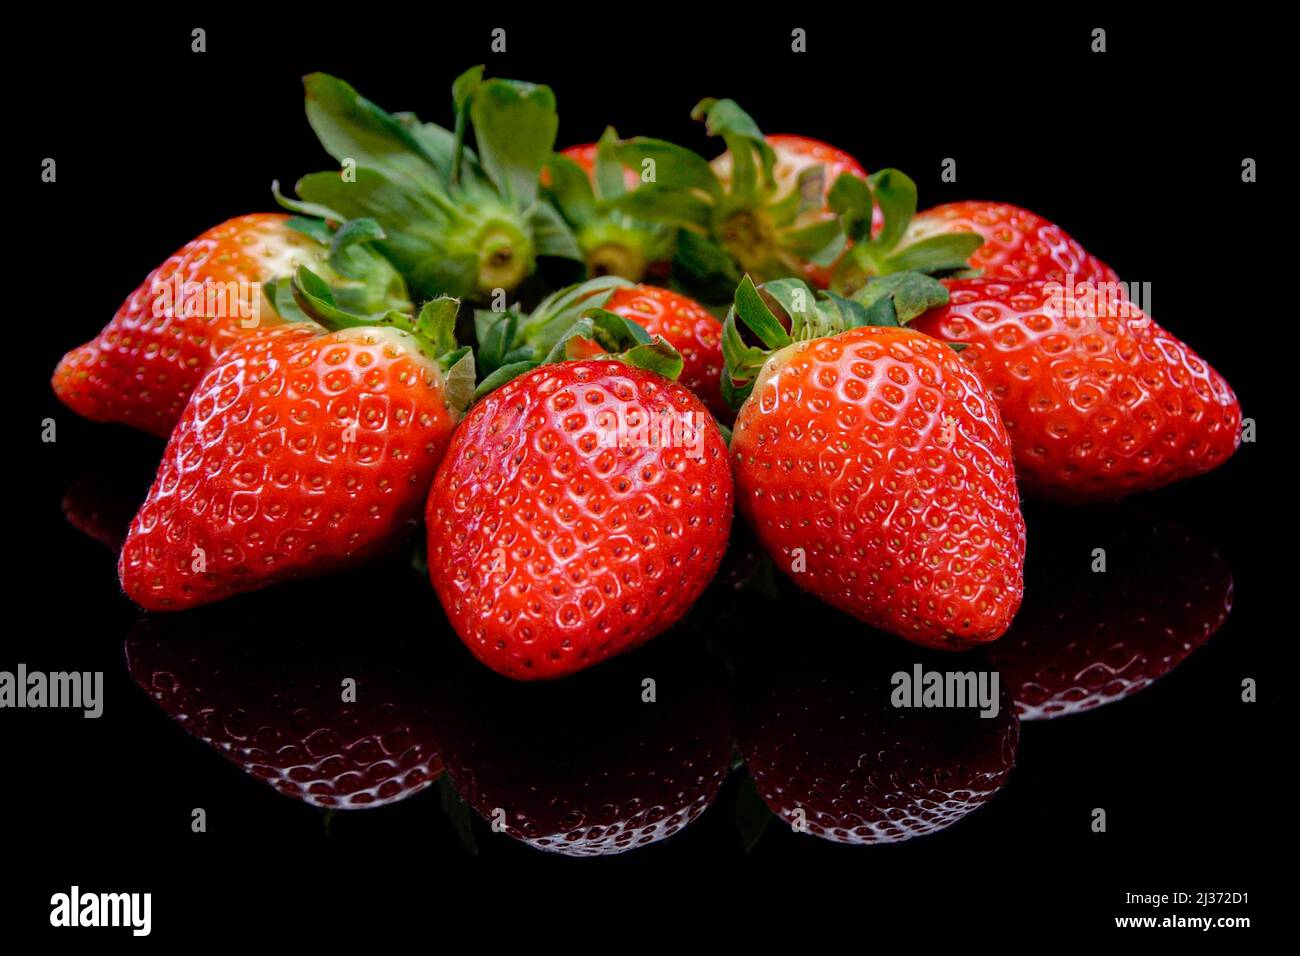 Strawberries on a black background close up view. Fresh, organic vibrant red strawberry. Raw vegan summer snack. Stock Photo